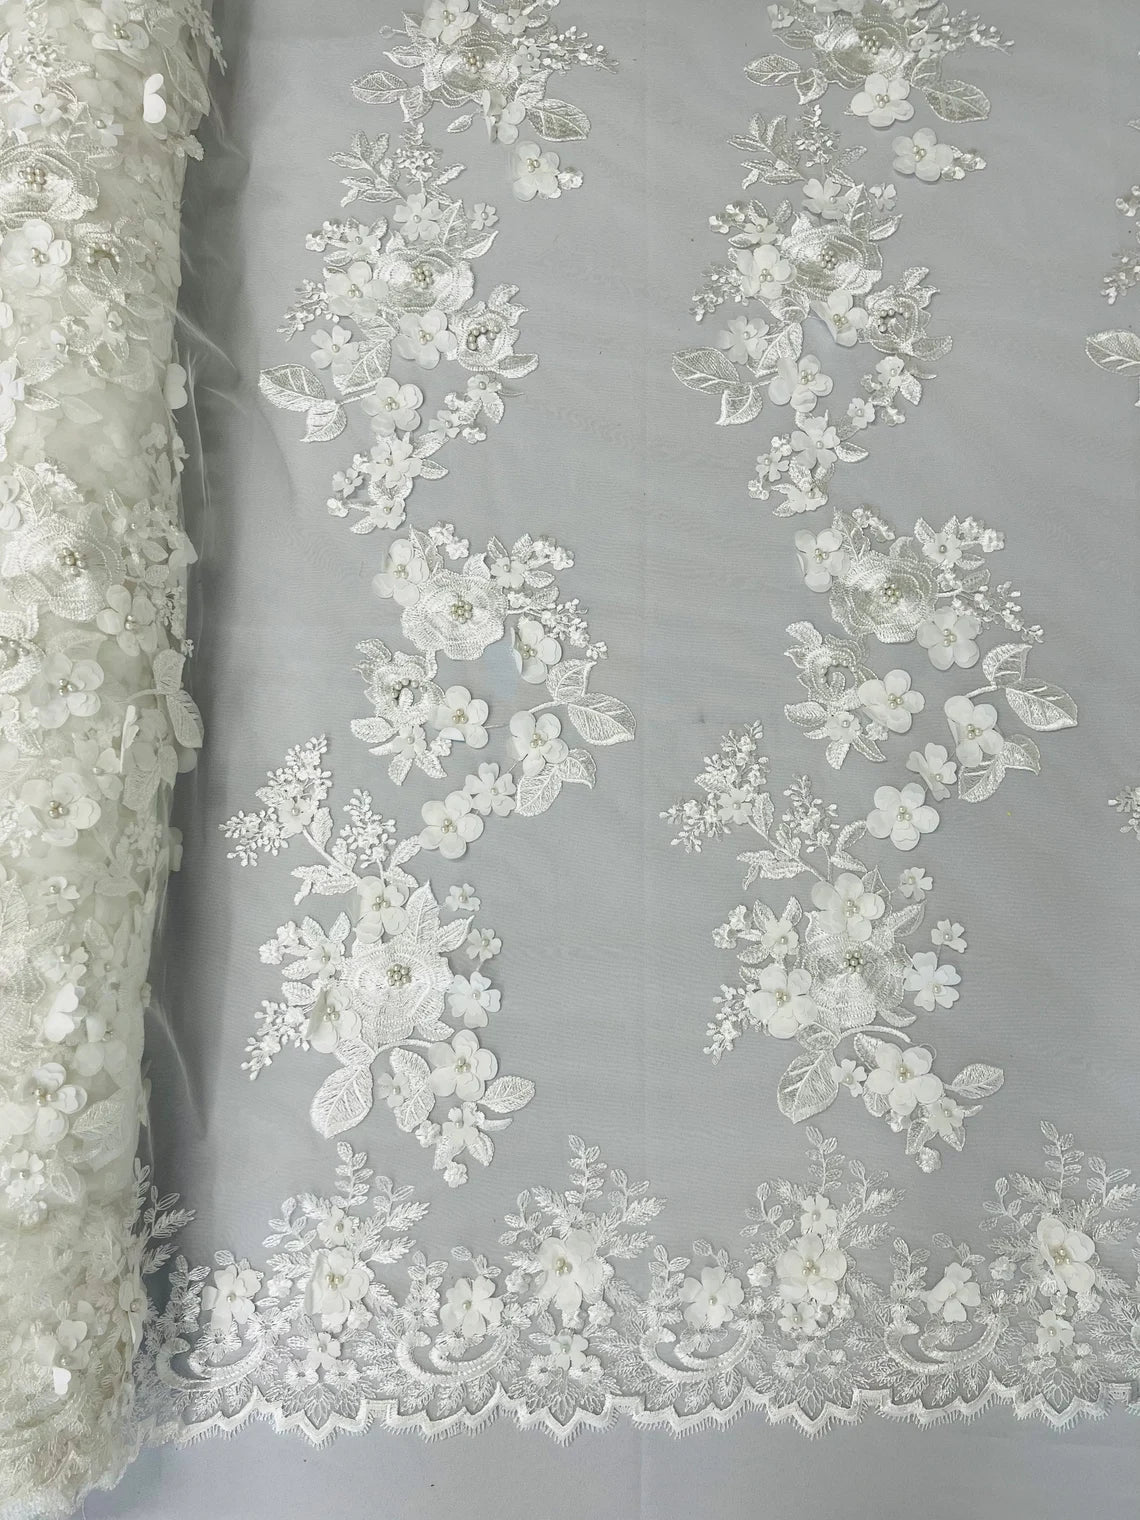 3D Flower Panels Fabric - Off-White - Flower Panels Bead Embroidered on Lace Fabric Sold By Yard